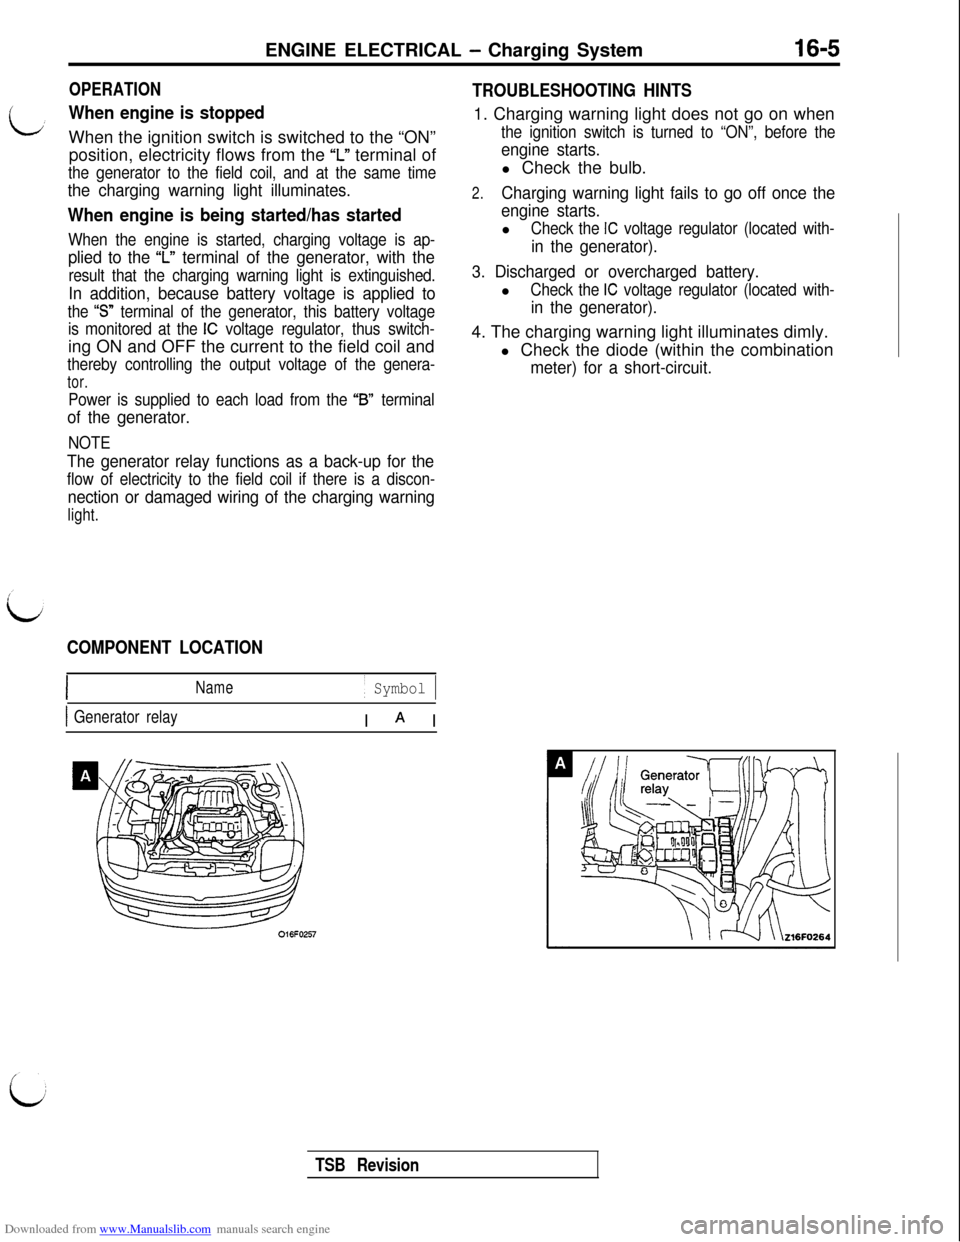 MITSUBISHI 3000GT 1992 2.G User Guide Downloaded from www.Manualslib.com manuals search engine ENGINE ELECTRICAL - Charging System16-5
OPERATION
When engine is stoppedWhen the ignition switch is switched to the “ON”
position, electric